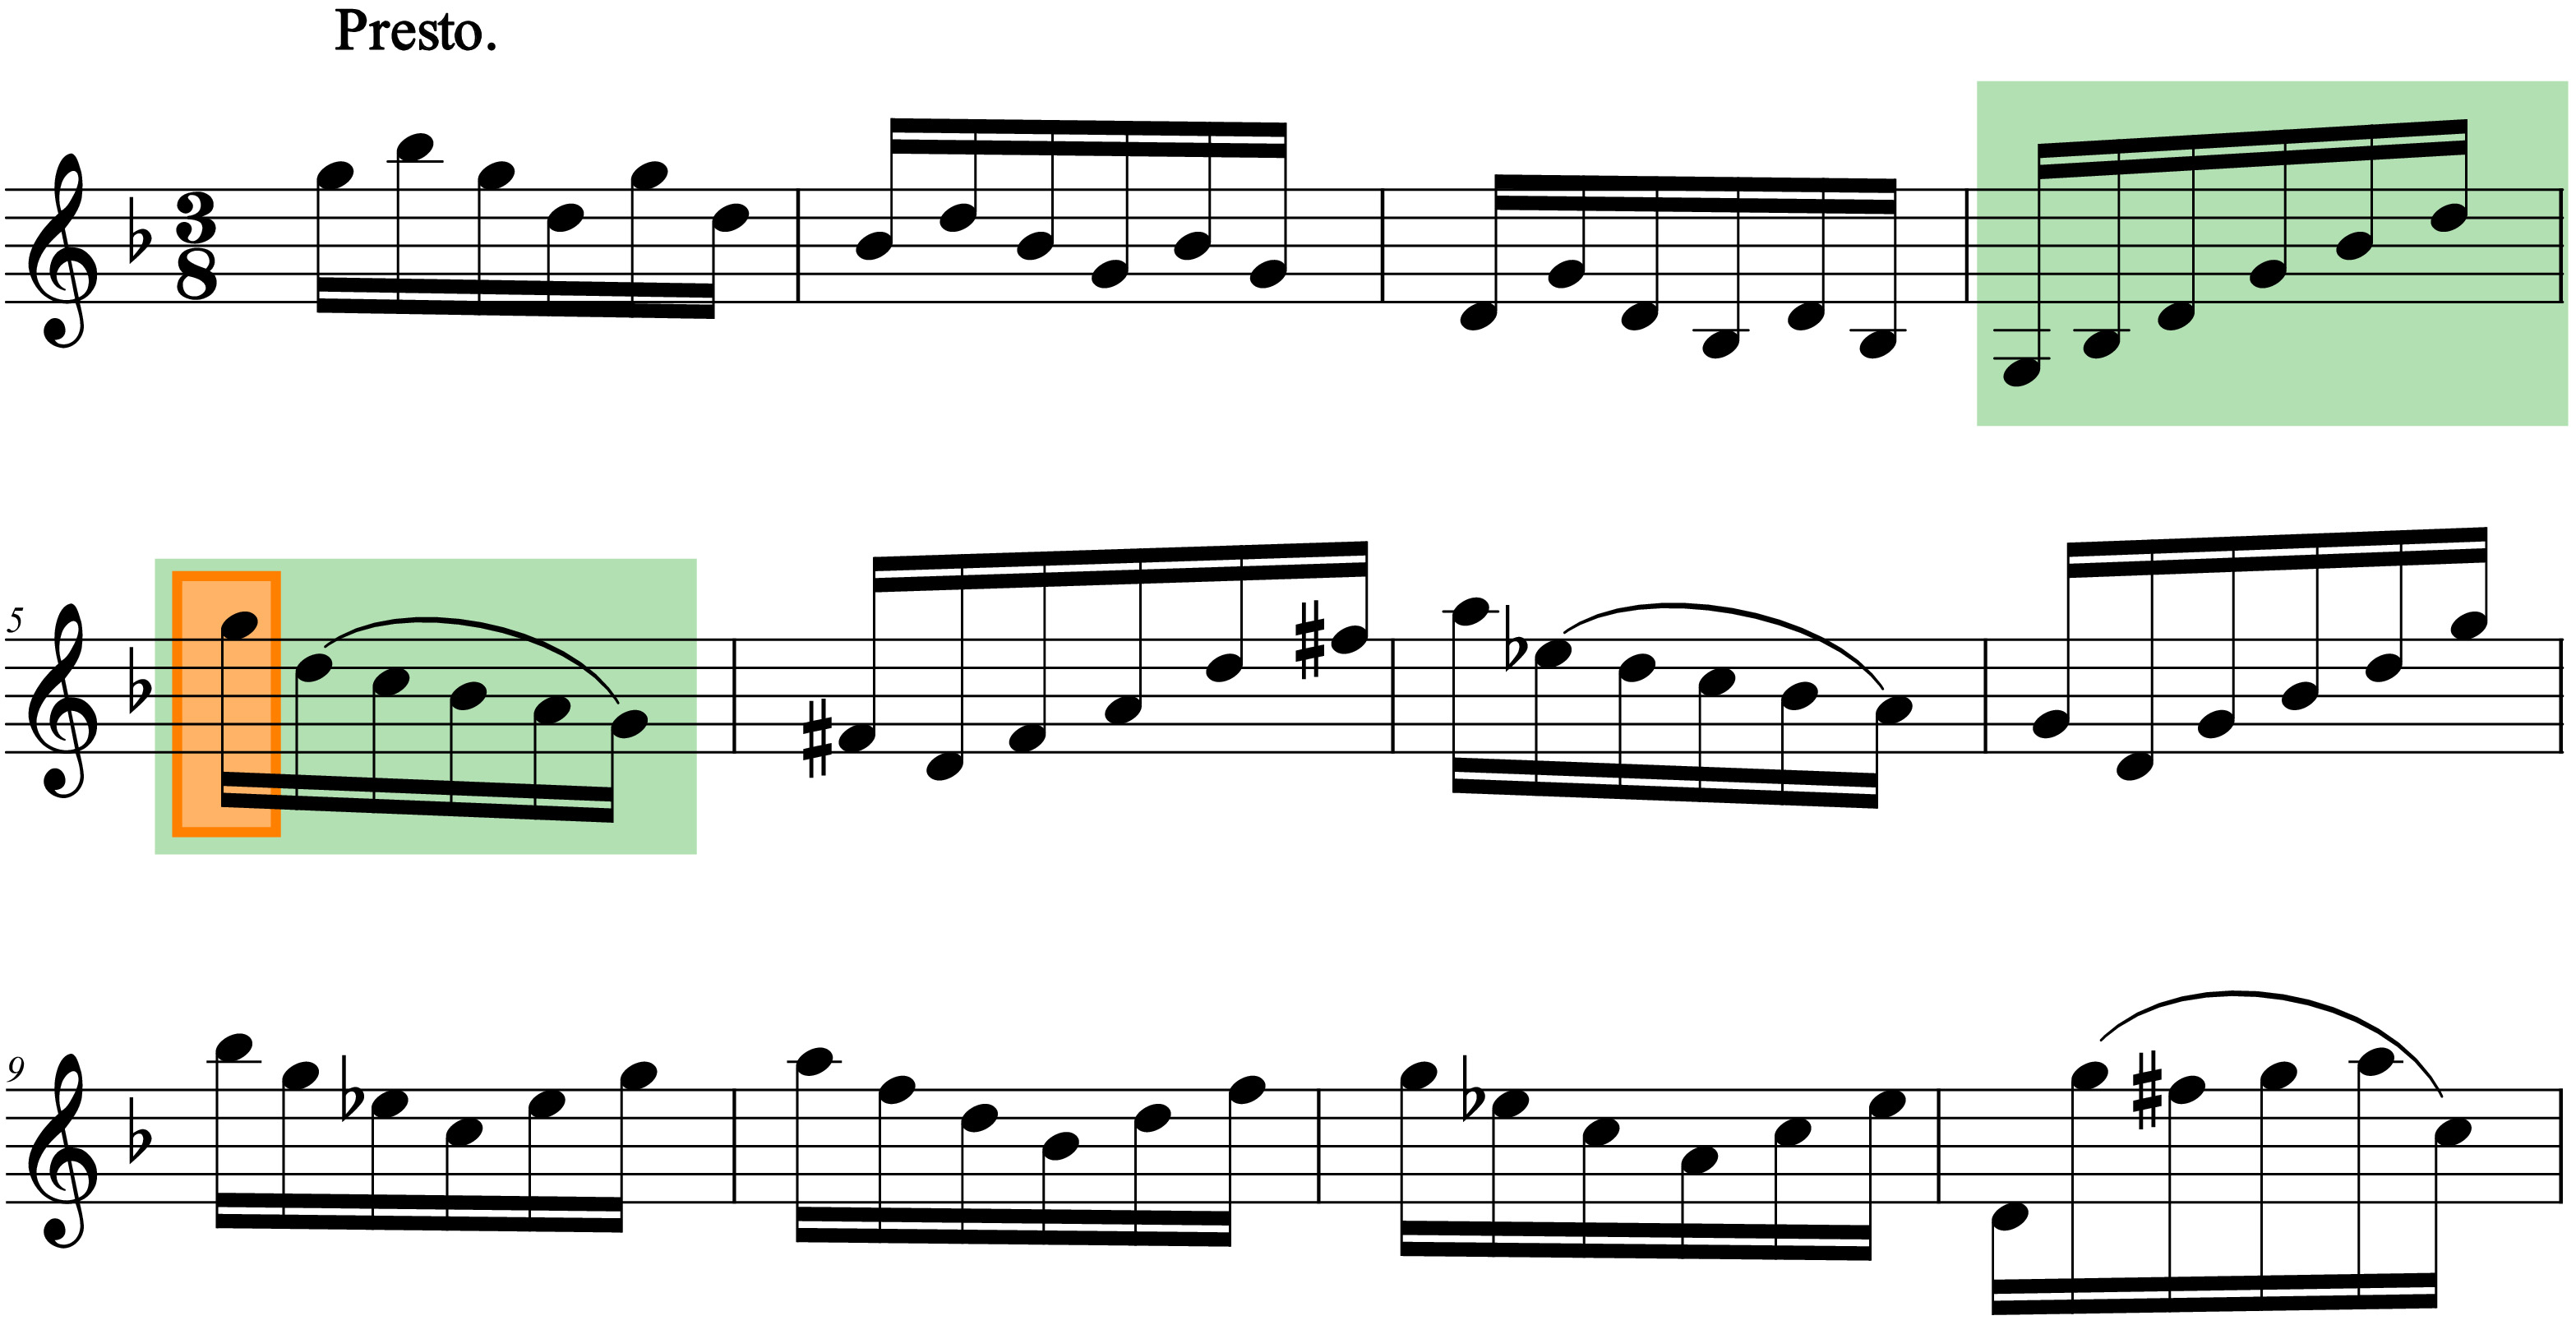 Excerpt of Bach’s G minor sonata (BWV 1001), 4th movement, with the green section considered in this study and the orange marked key g” as highest key. Source: [14], edited by the author.